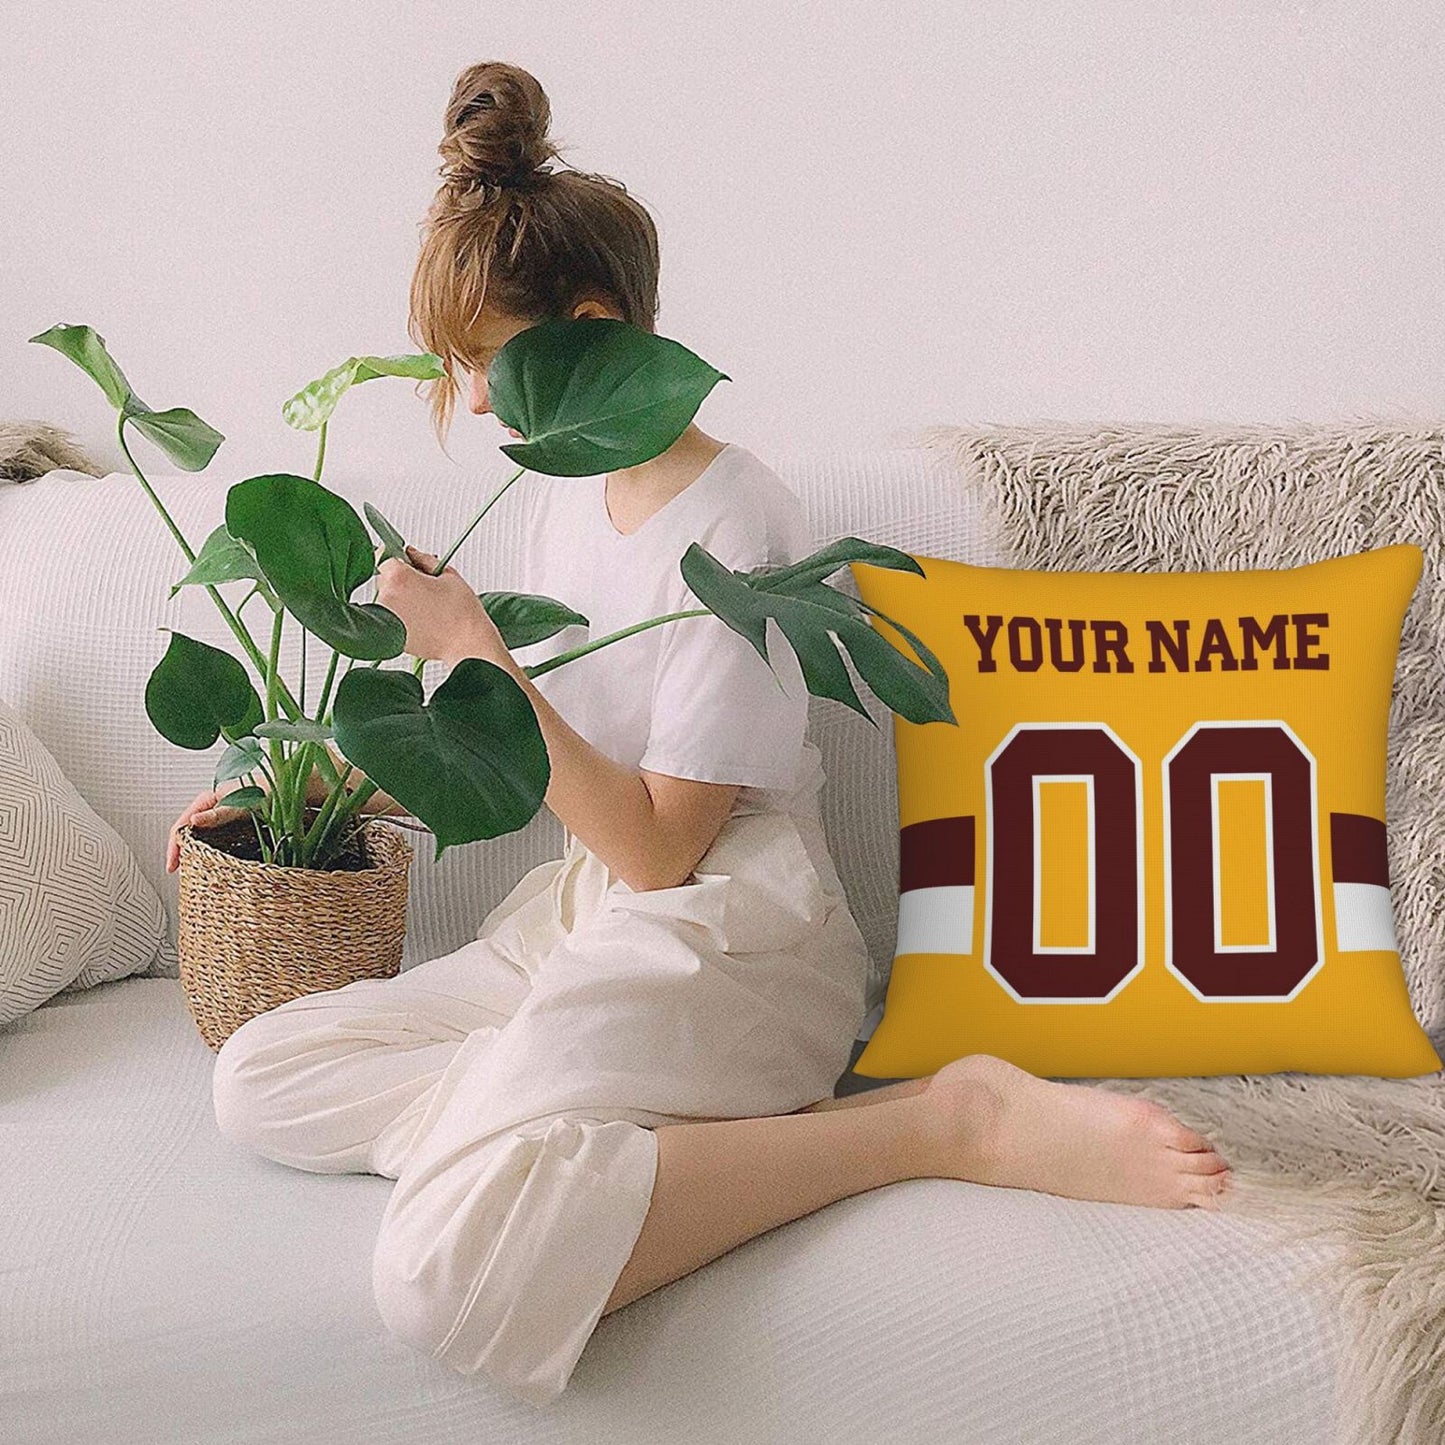 Custom Gold Washington Commanders Decorative Throw Pillow Case - Print Personalized Football Team Fans Name & Number Birthday Gift